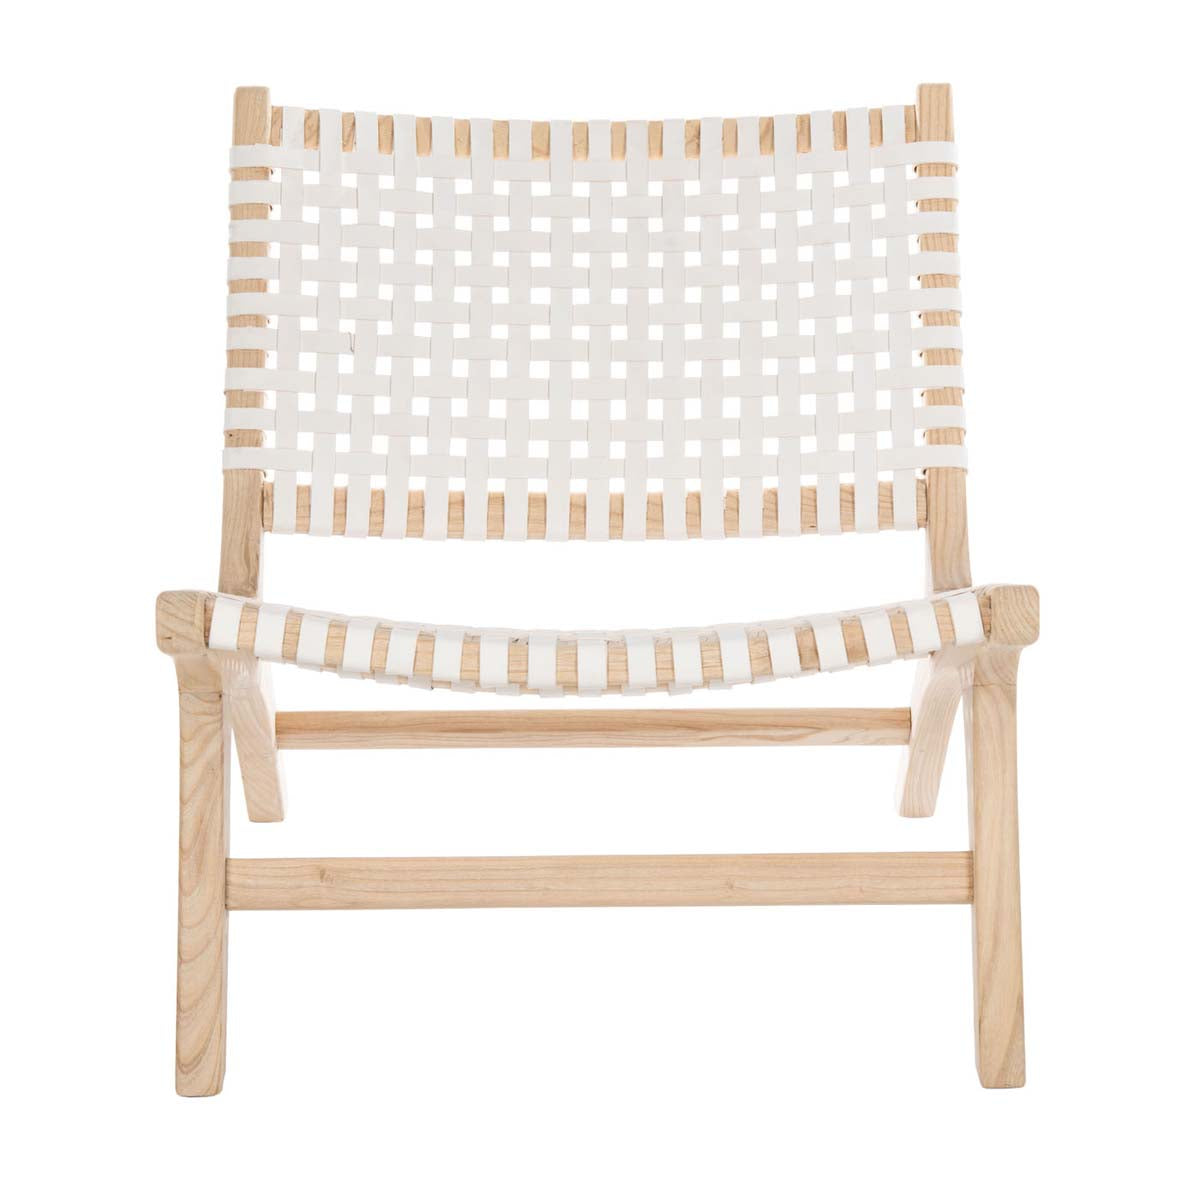 Safavieh Luna Leather Woven Accent Chair , ACH1002 - White Leather/Natural